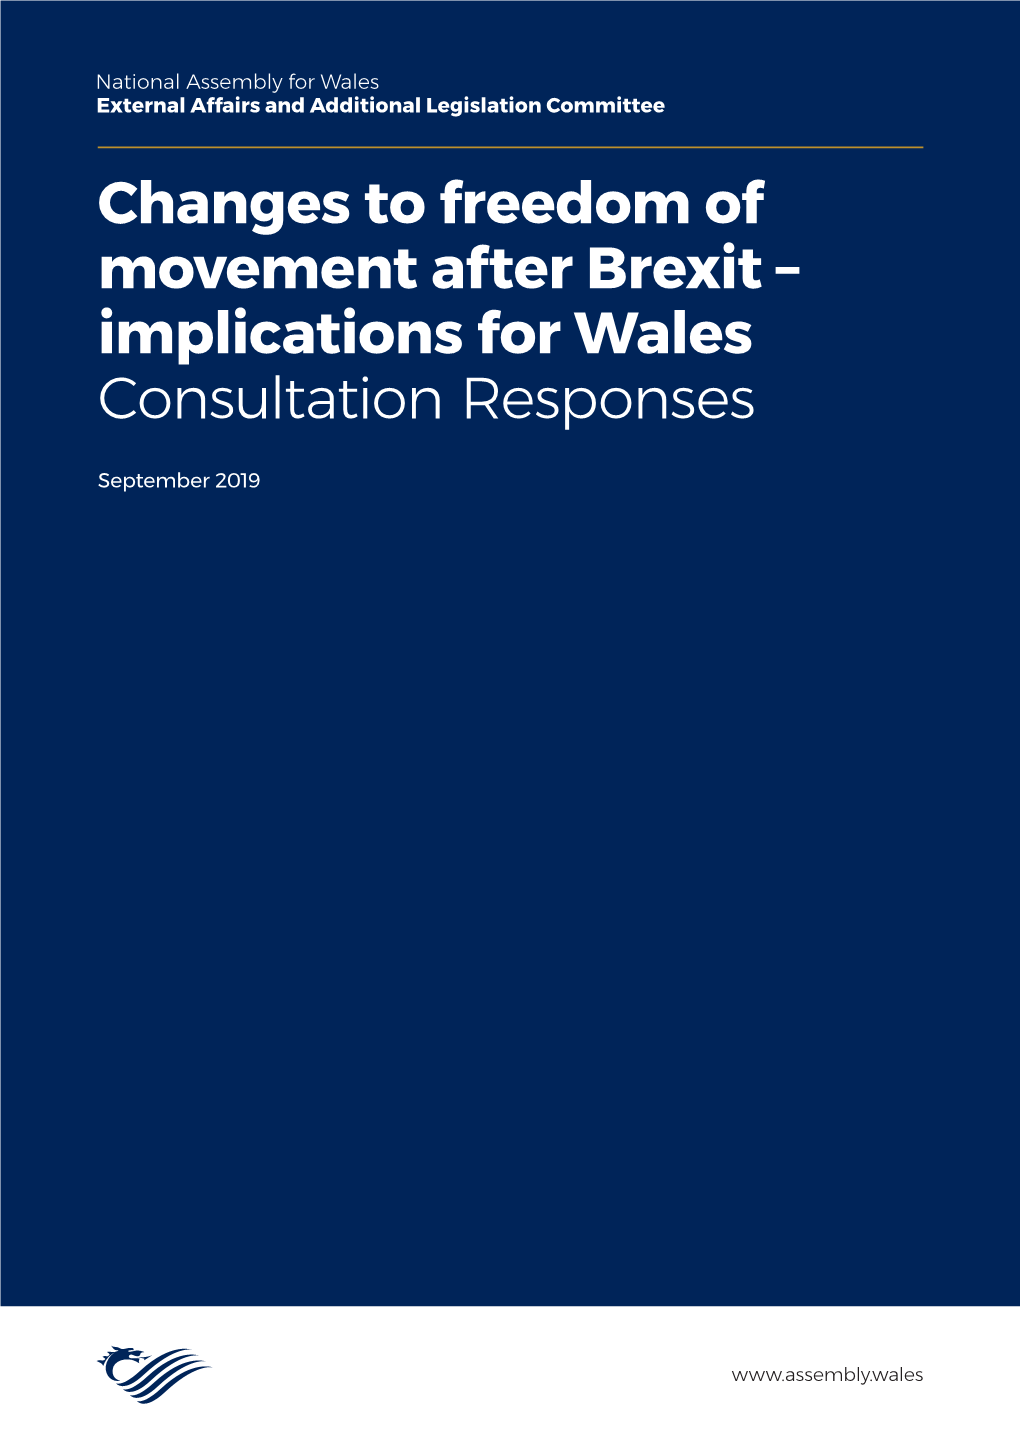 Changes to Freedom of Movement After Brexit – Implications for Wales Consultation Responses